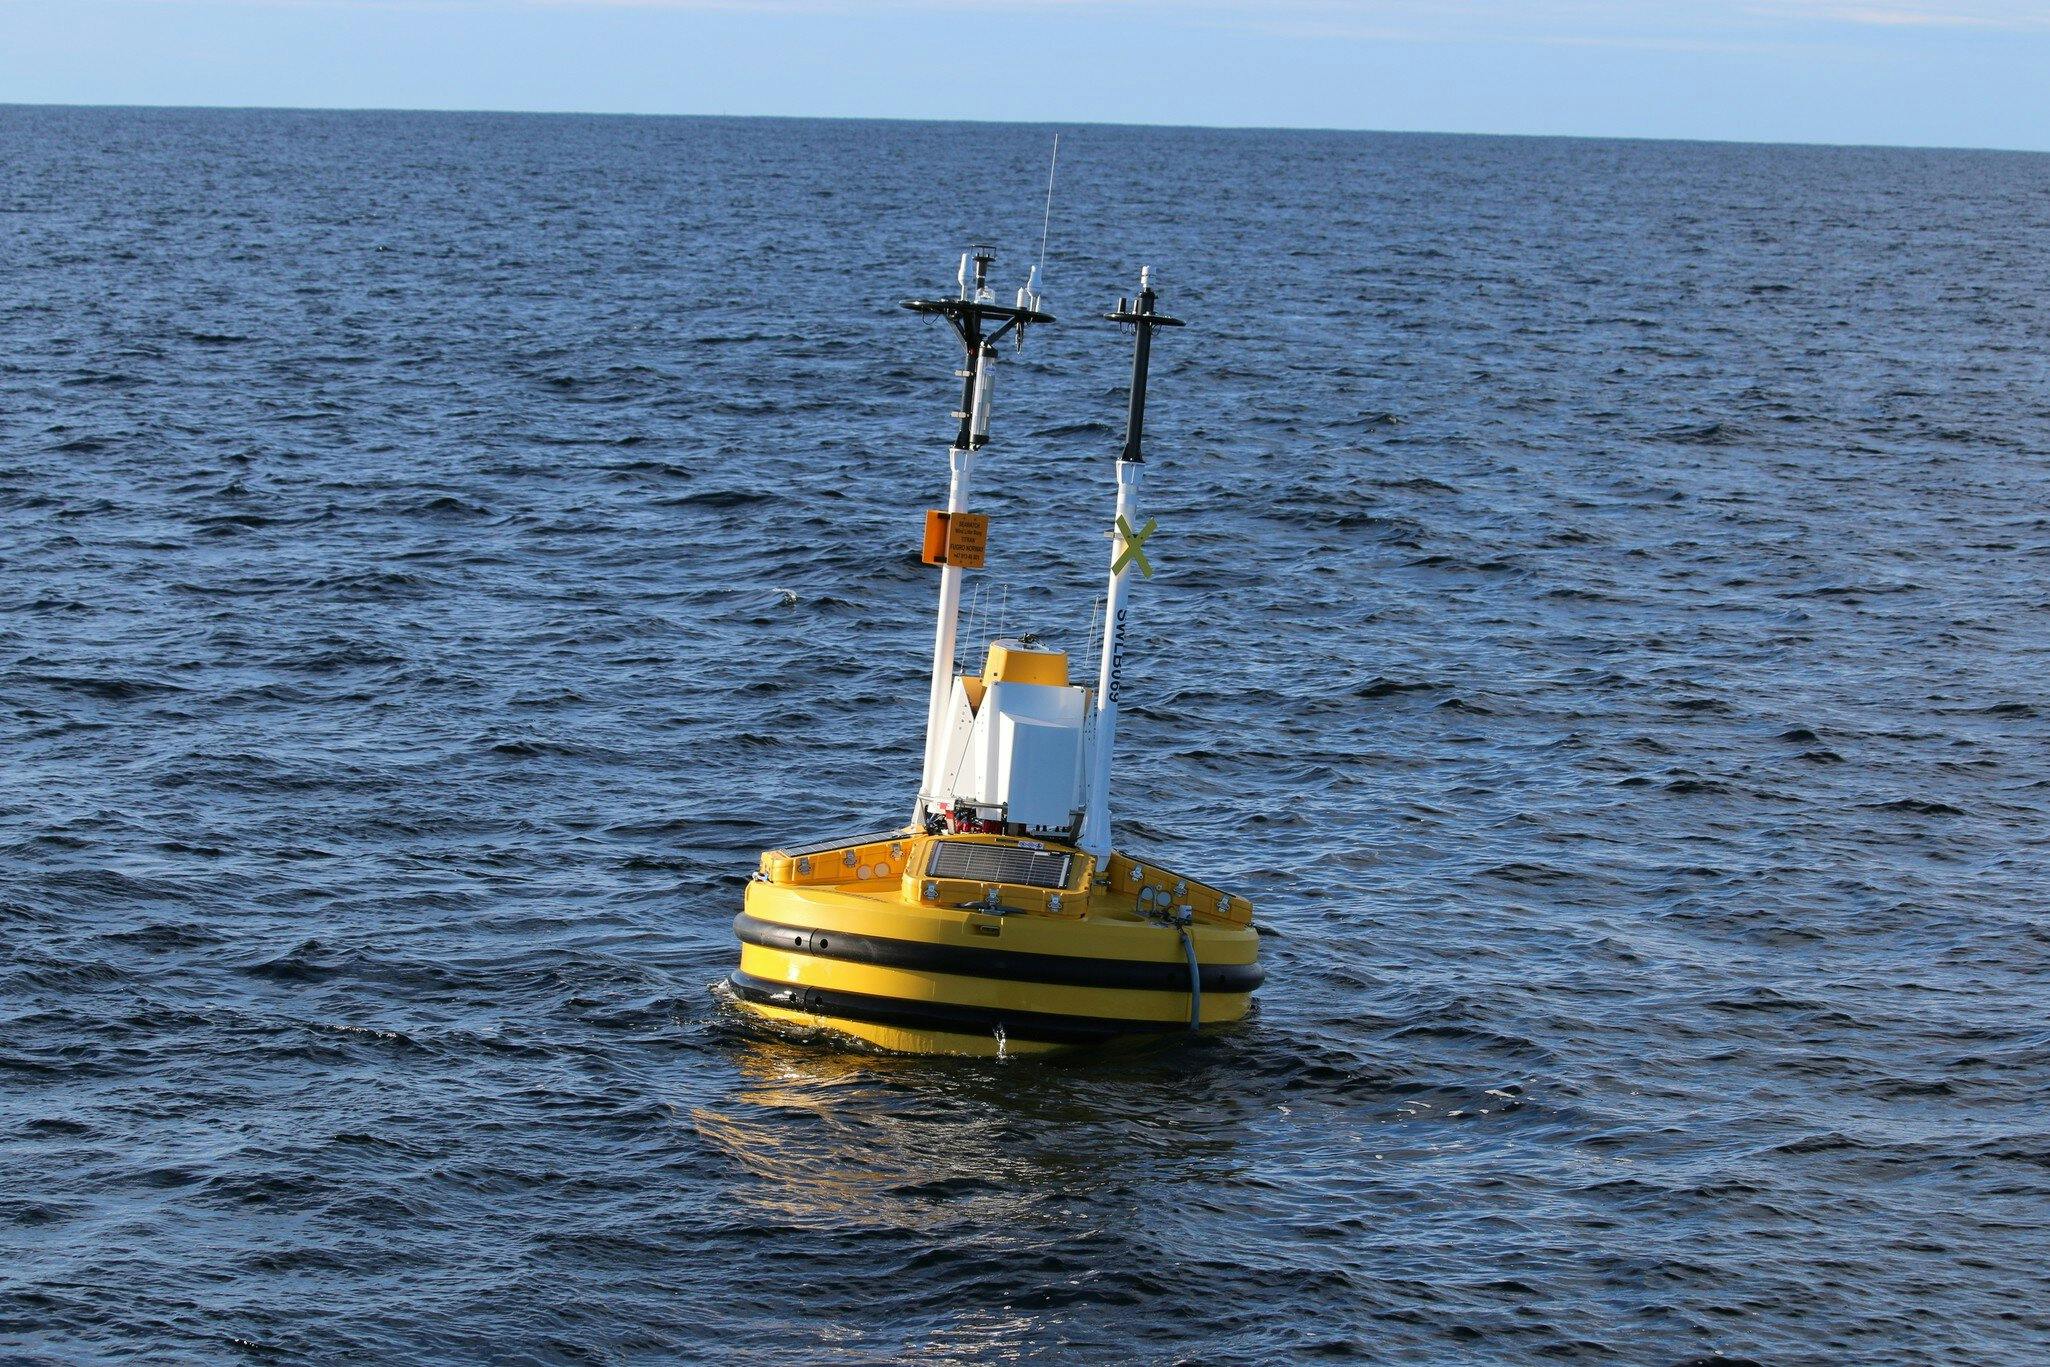 SWLB Operations Titran
Fugro, Seawatch Wind Lidar Buoy, Offshore Wind
Seawatch Buoy waiting to be deployed